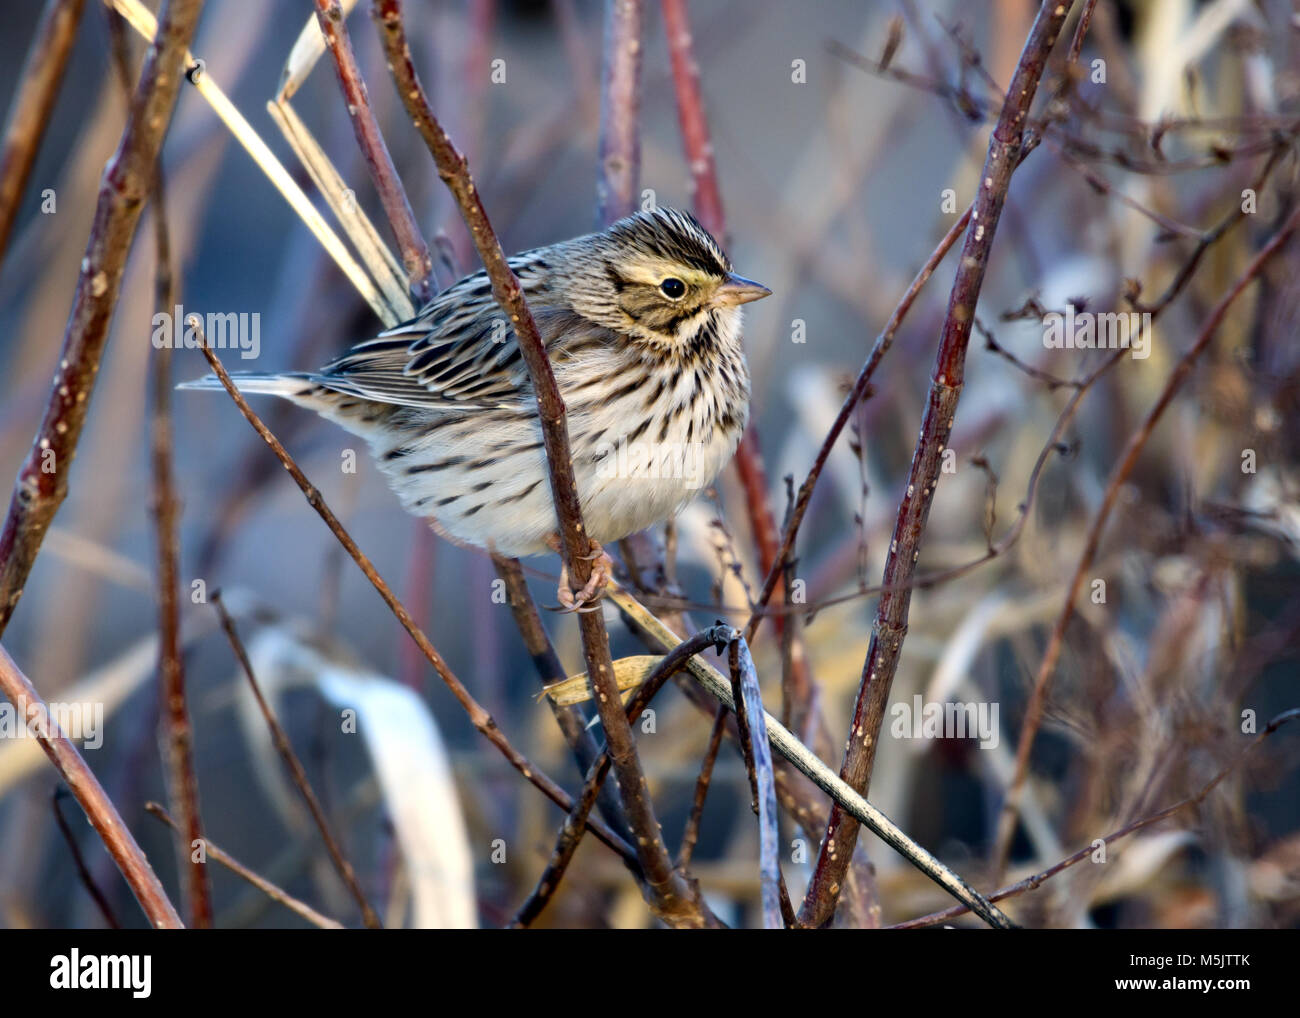 Savannah Sparrow - Passerculus sandwichensis - Perched on a branch with feathers fluffed Stock Photo